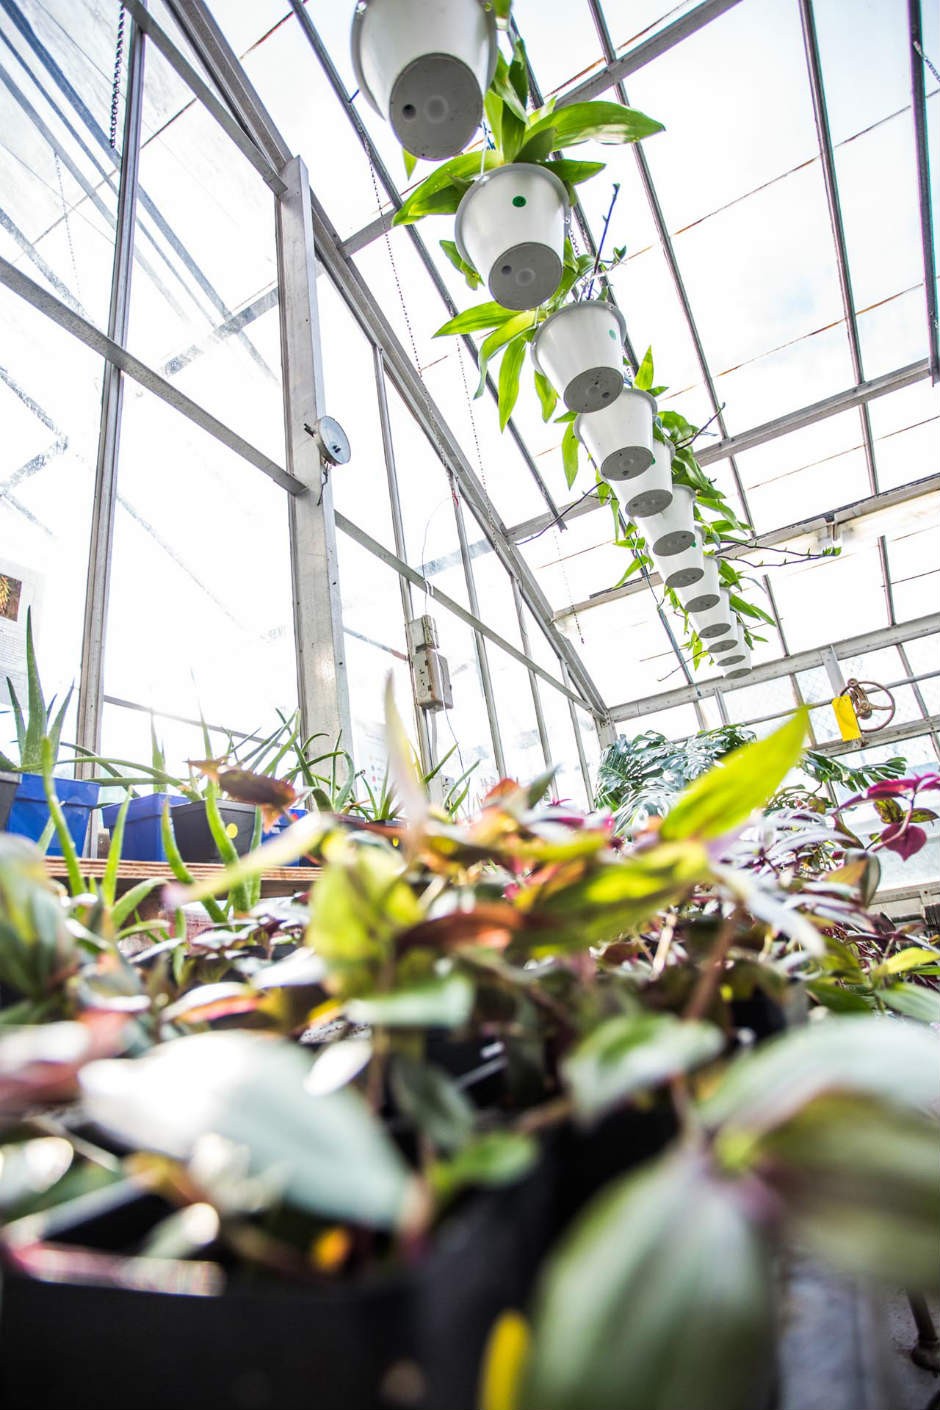 The Concordia University greenhouse is just one in a slew of urban horticulture projects in Montreal.